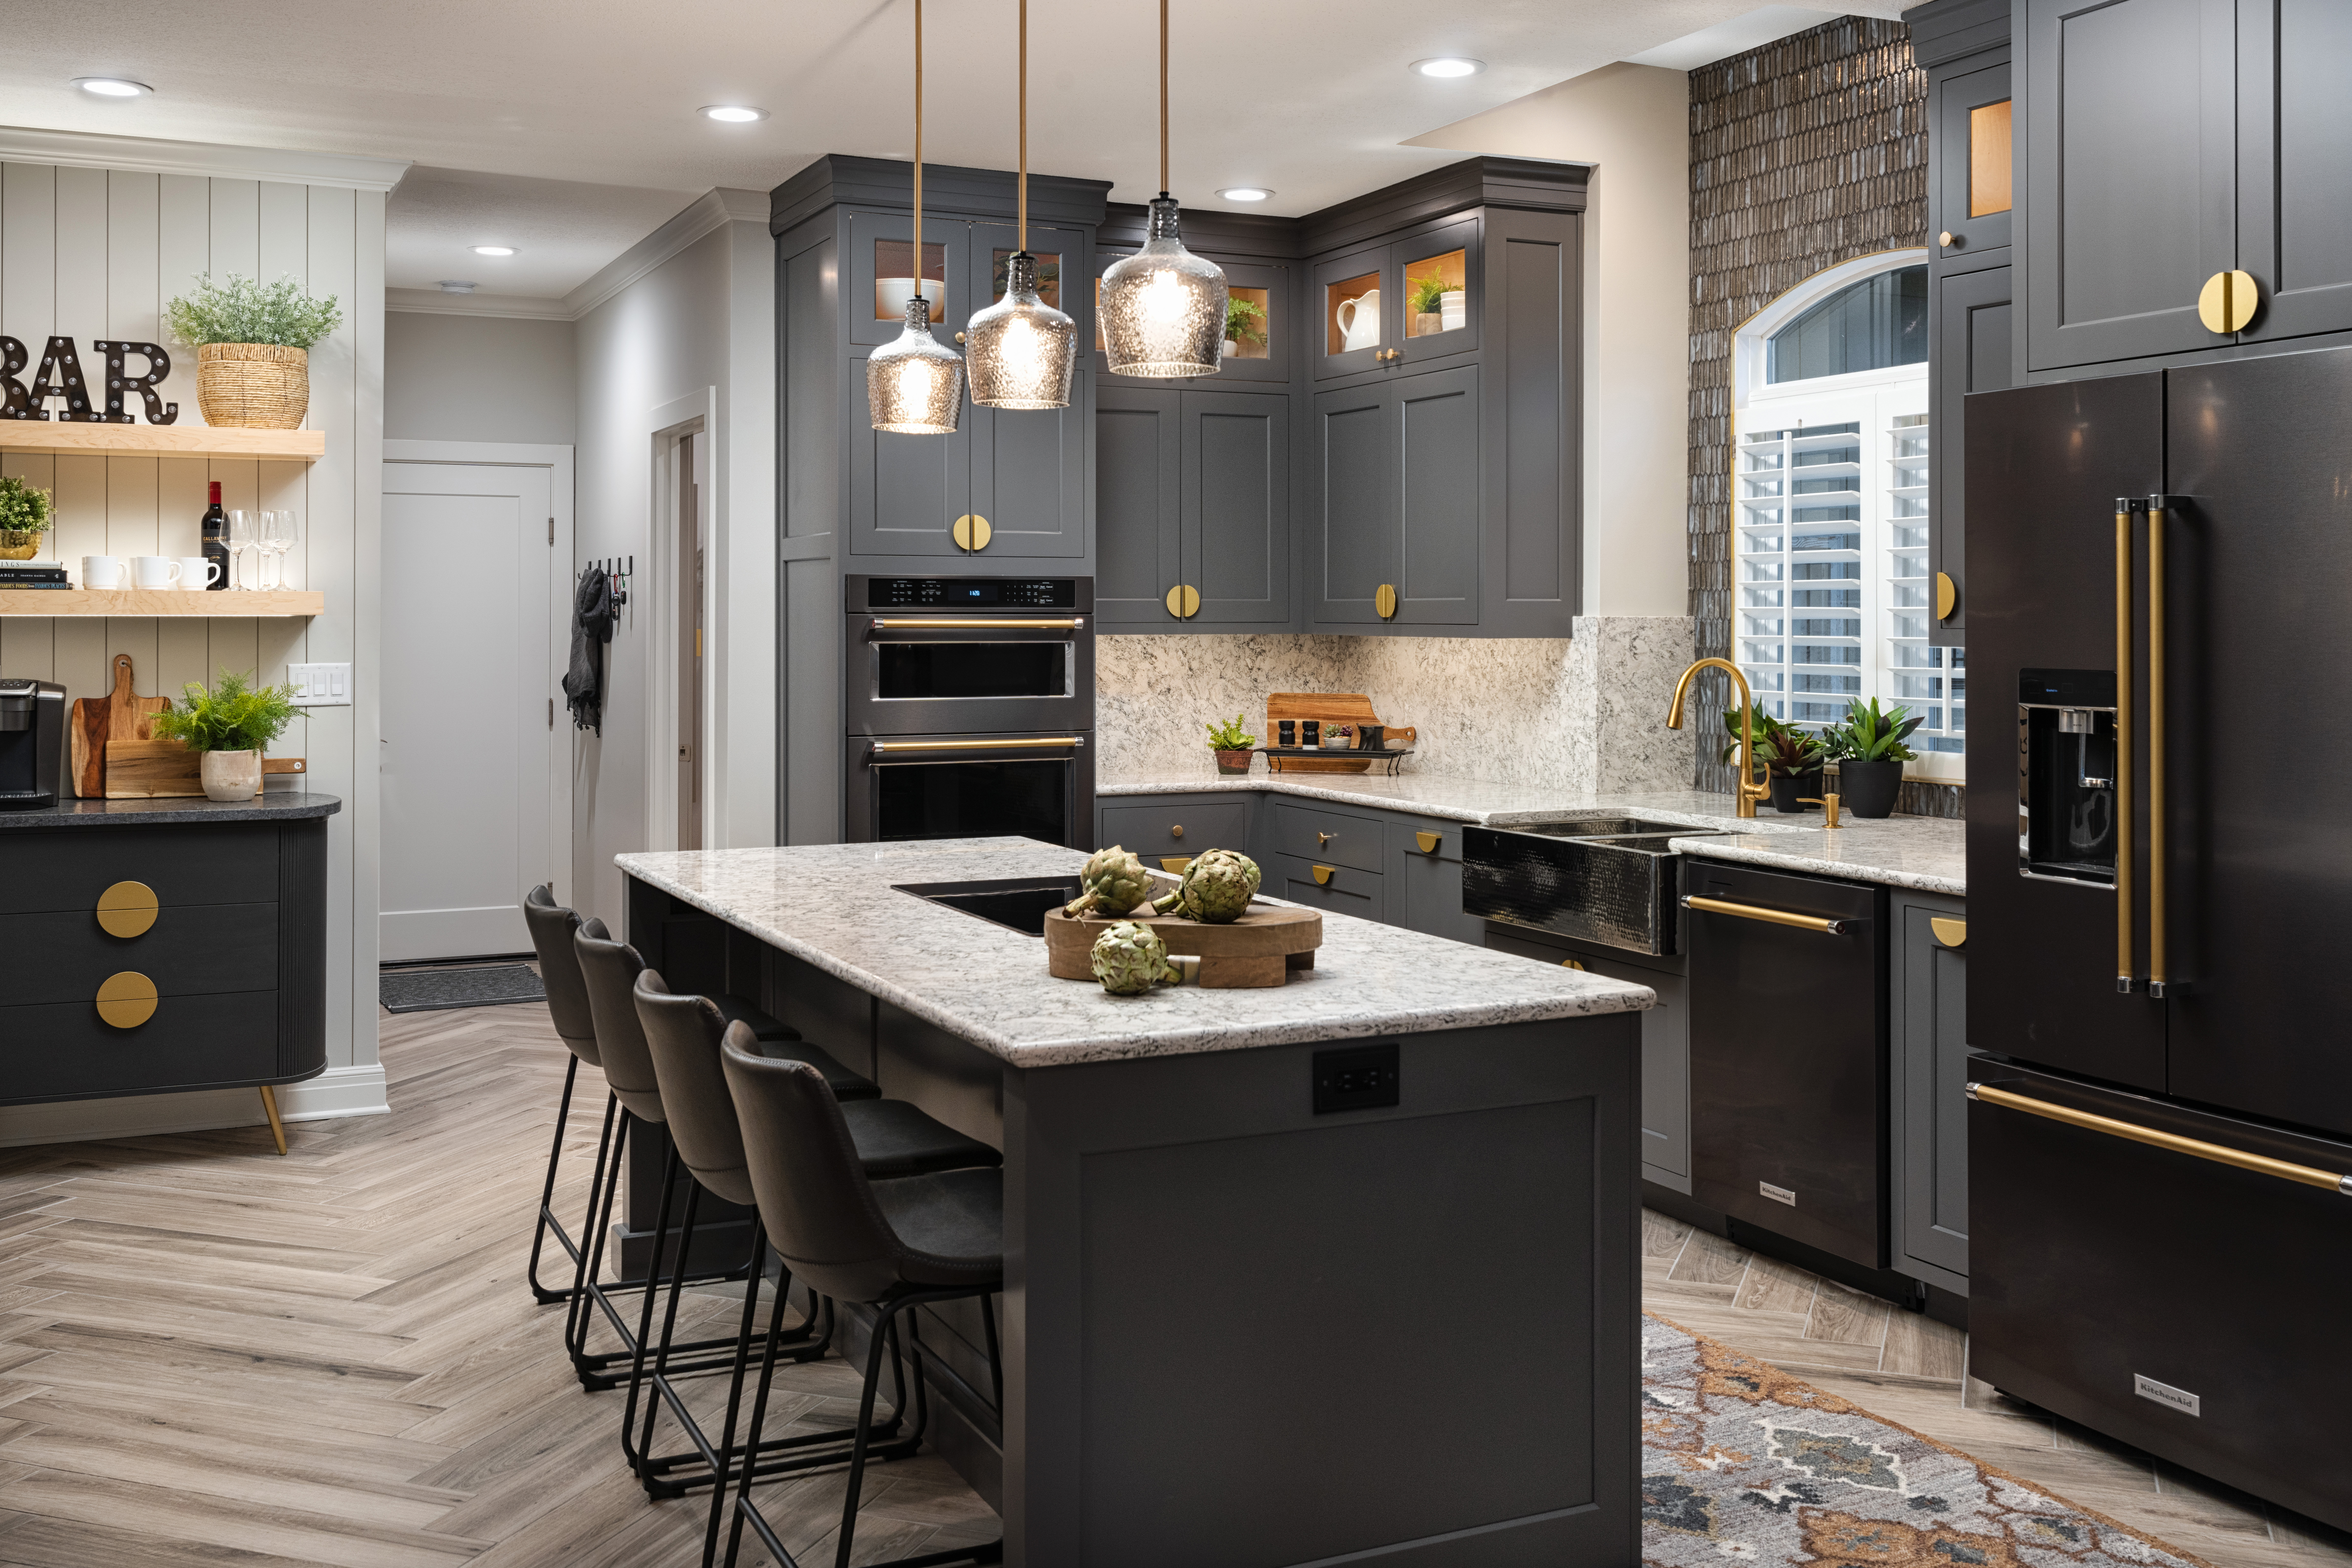 Newly Remodeled Kitchen With Island, Black Cabinets, and Black Appliances